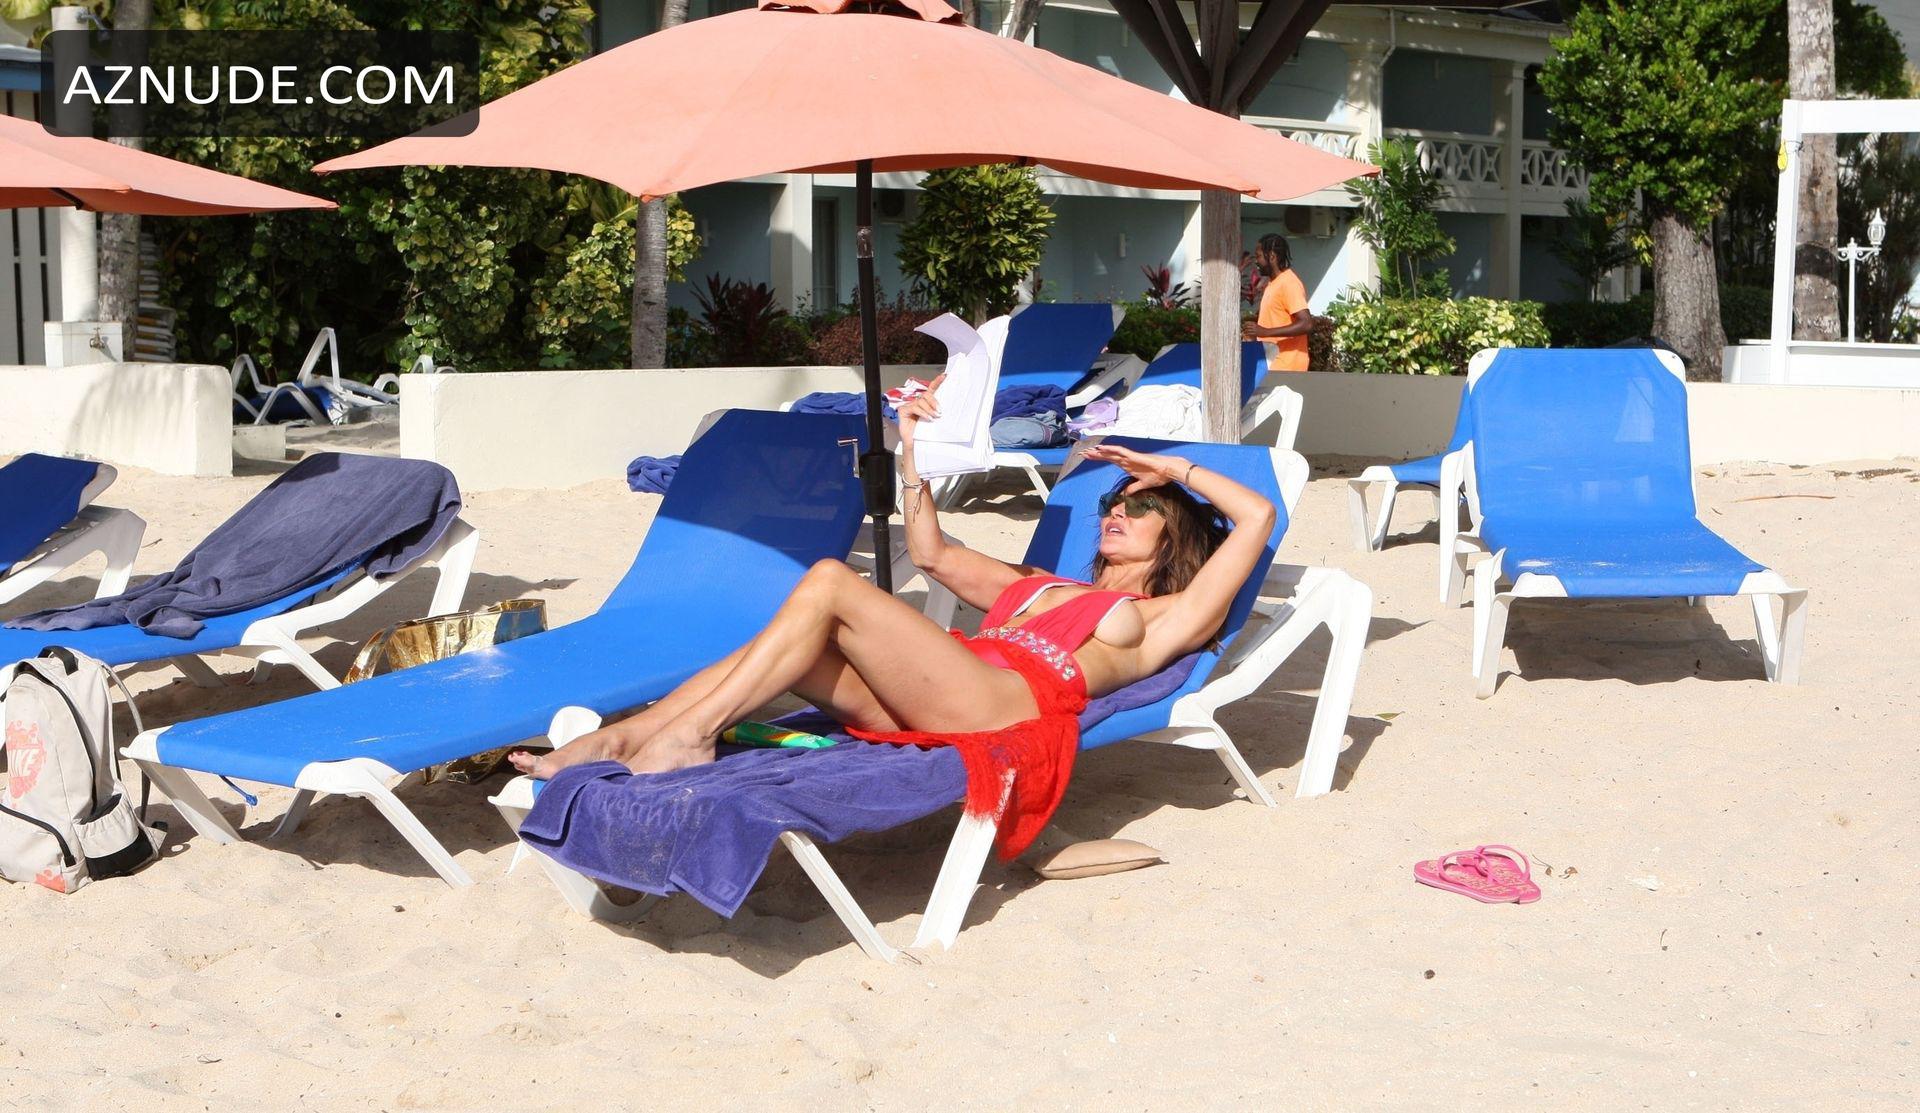 Lizzie Cundy Reading A Script On Her Sun Lounger While